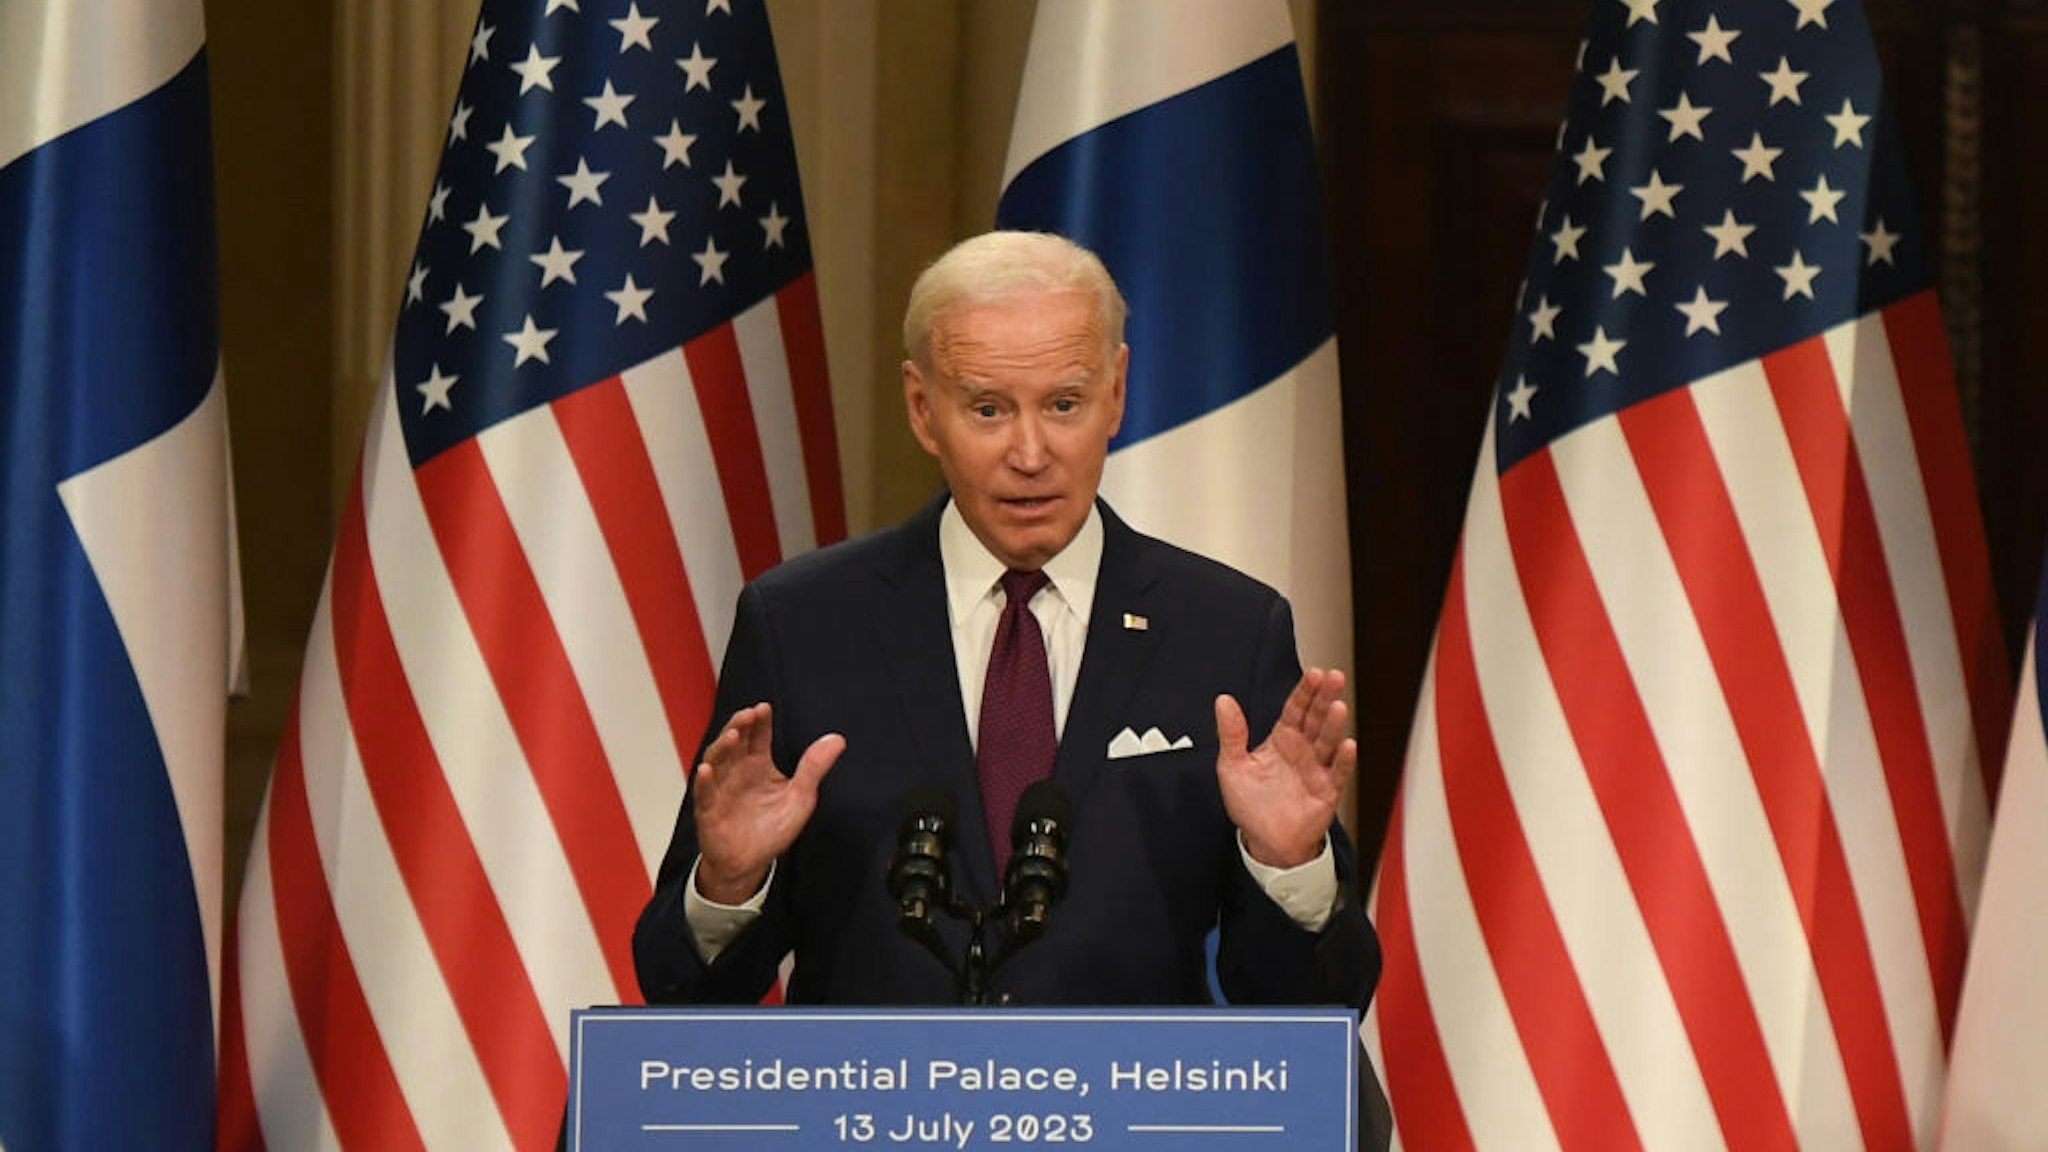 US President Joe Biden during a news conference at the US-Nordic Leaders' Summit in Helsinki, Finland, on Thursday, July 13, 2023. The Nordic countries will line up behind the initiative led by the Group of Seven nations to provide Ukraine with security assurances, in conjunction with the leaders' summit. Photographer: Chris J. Ratcliffe/Bloomberg via Getty Images